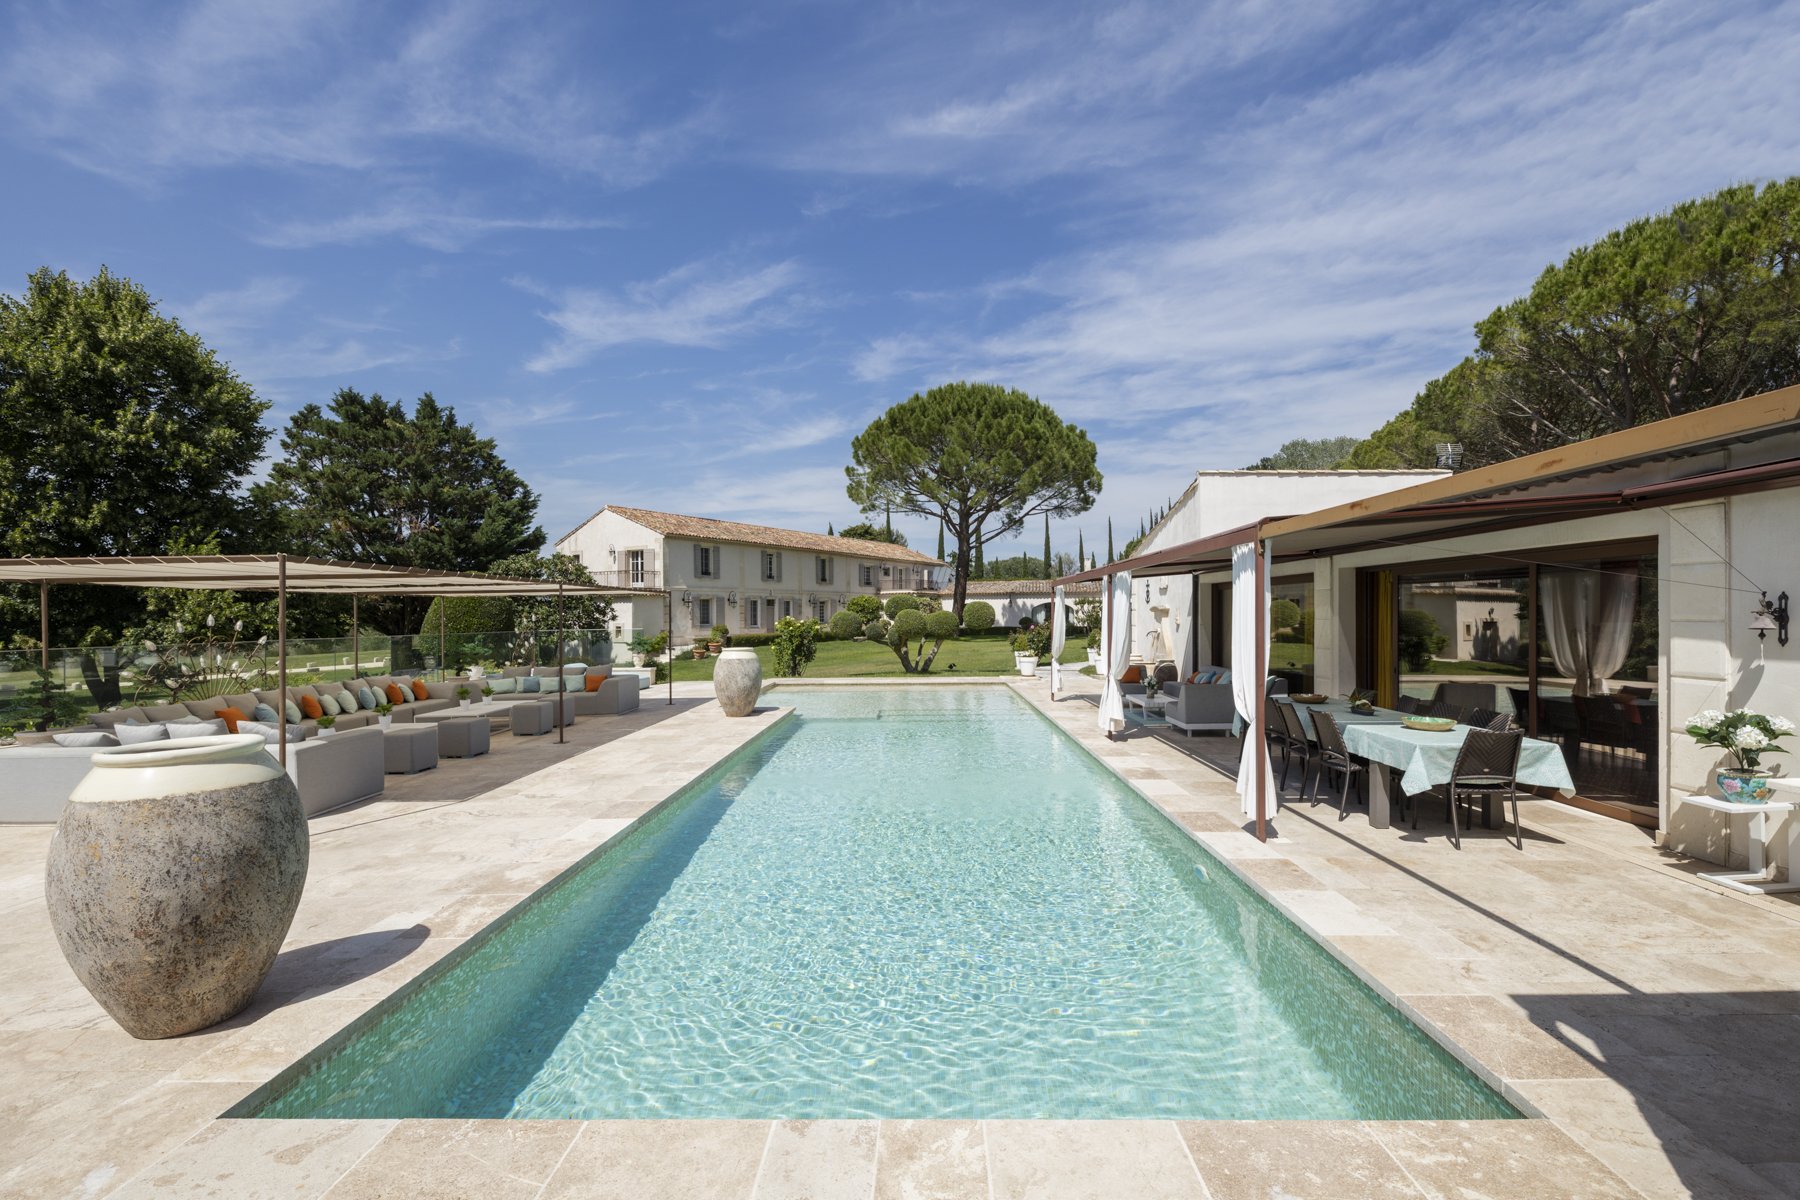 Luxury Villa for Sale in the Bouches-du-Rhone, Provence — Francis York